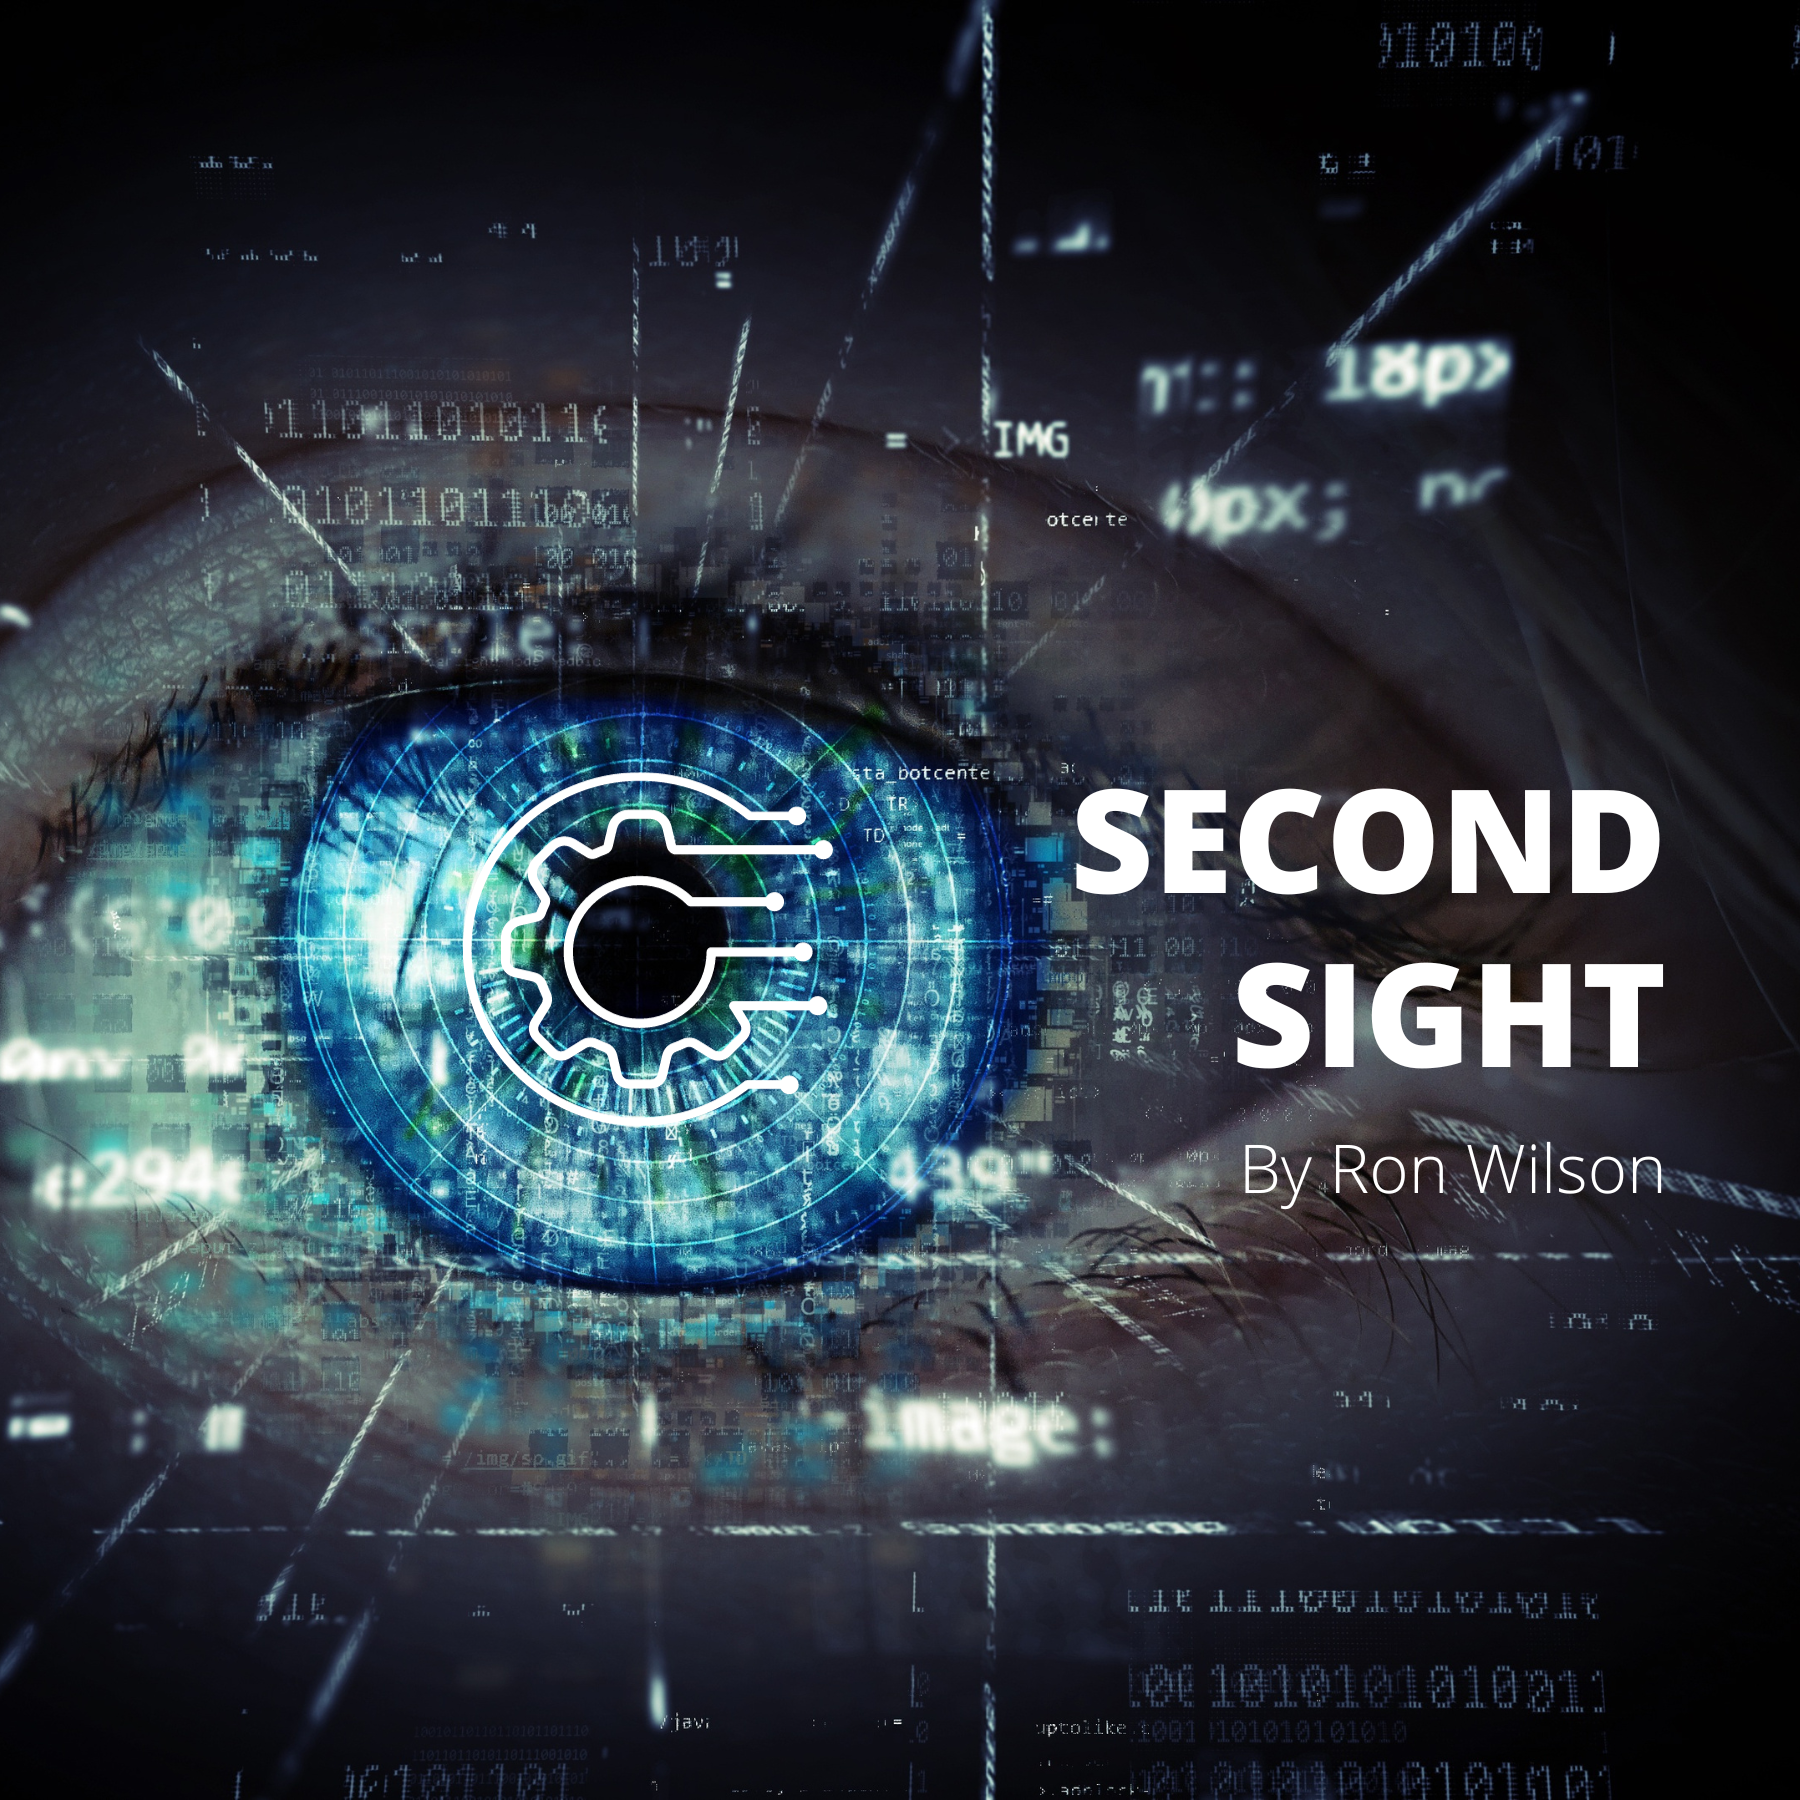 Second Sight by Ron Wilson